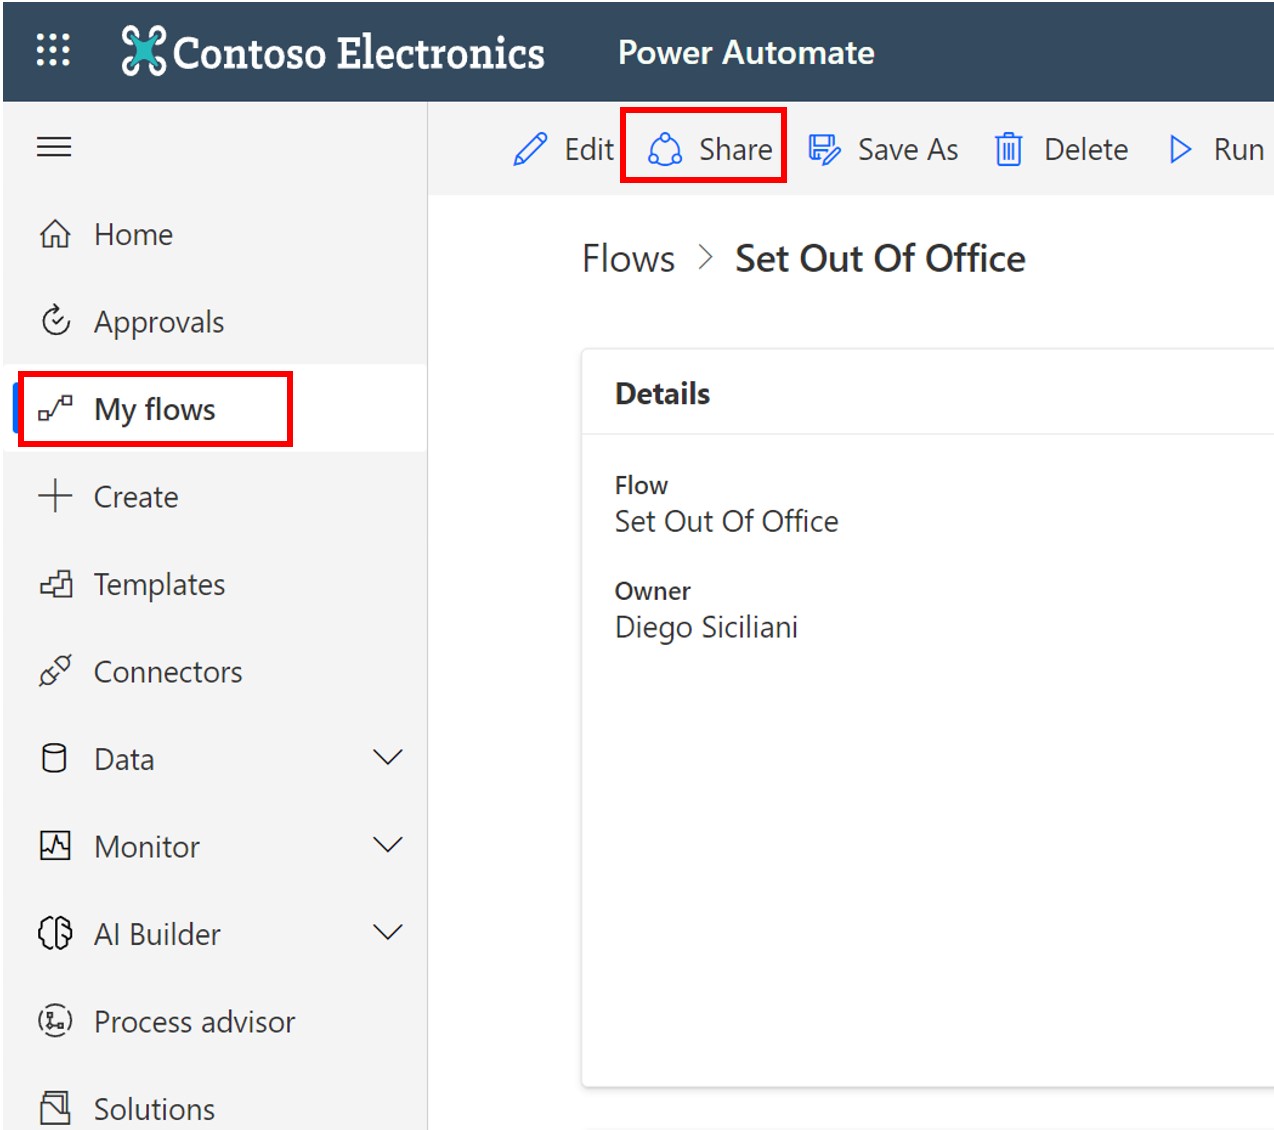 Screenshot of the Power Automate Share option flow.